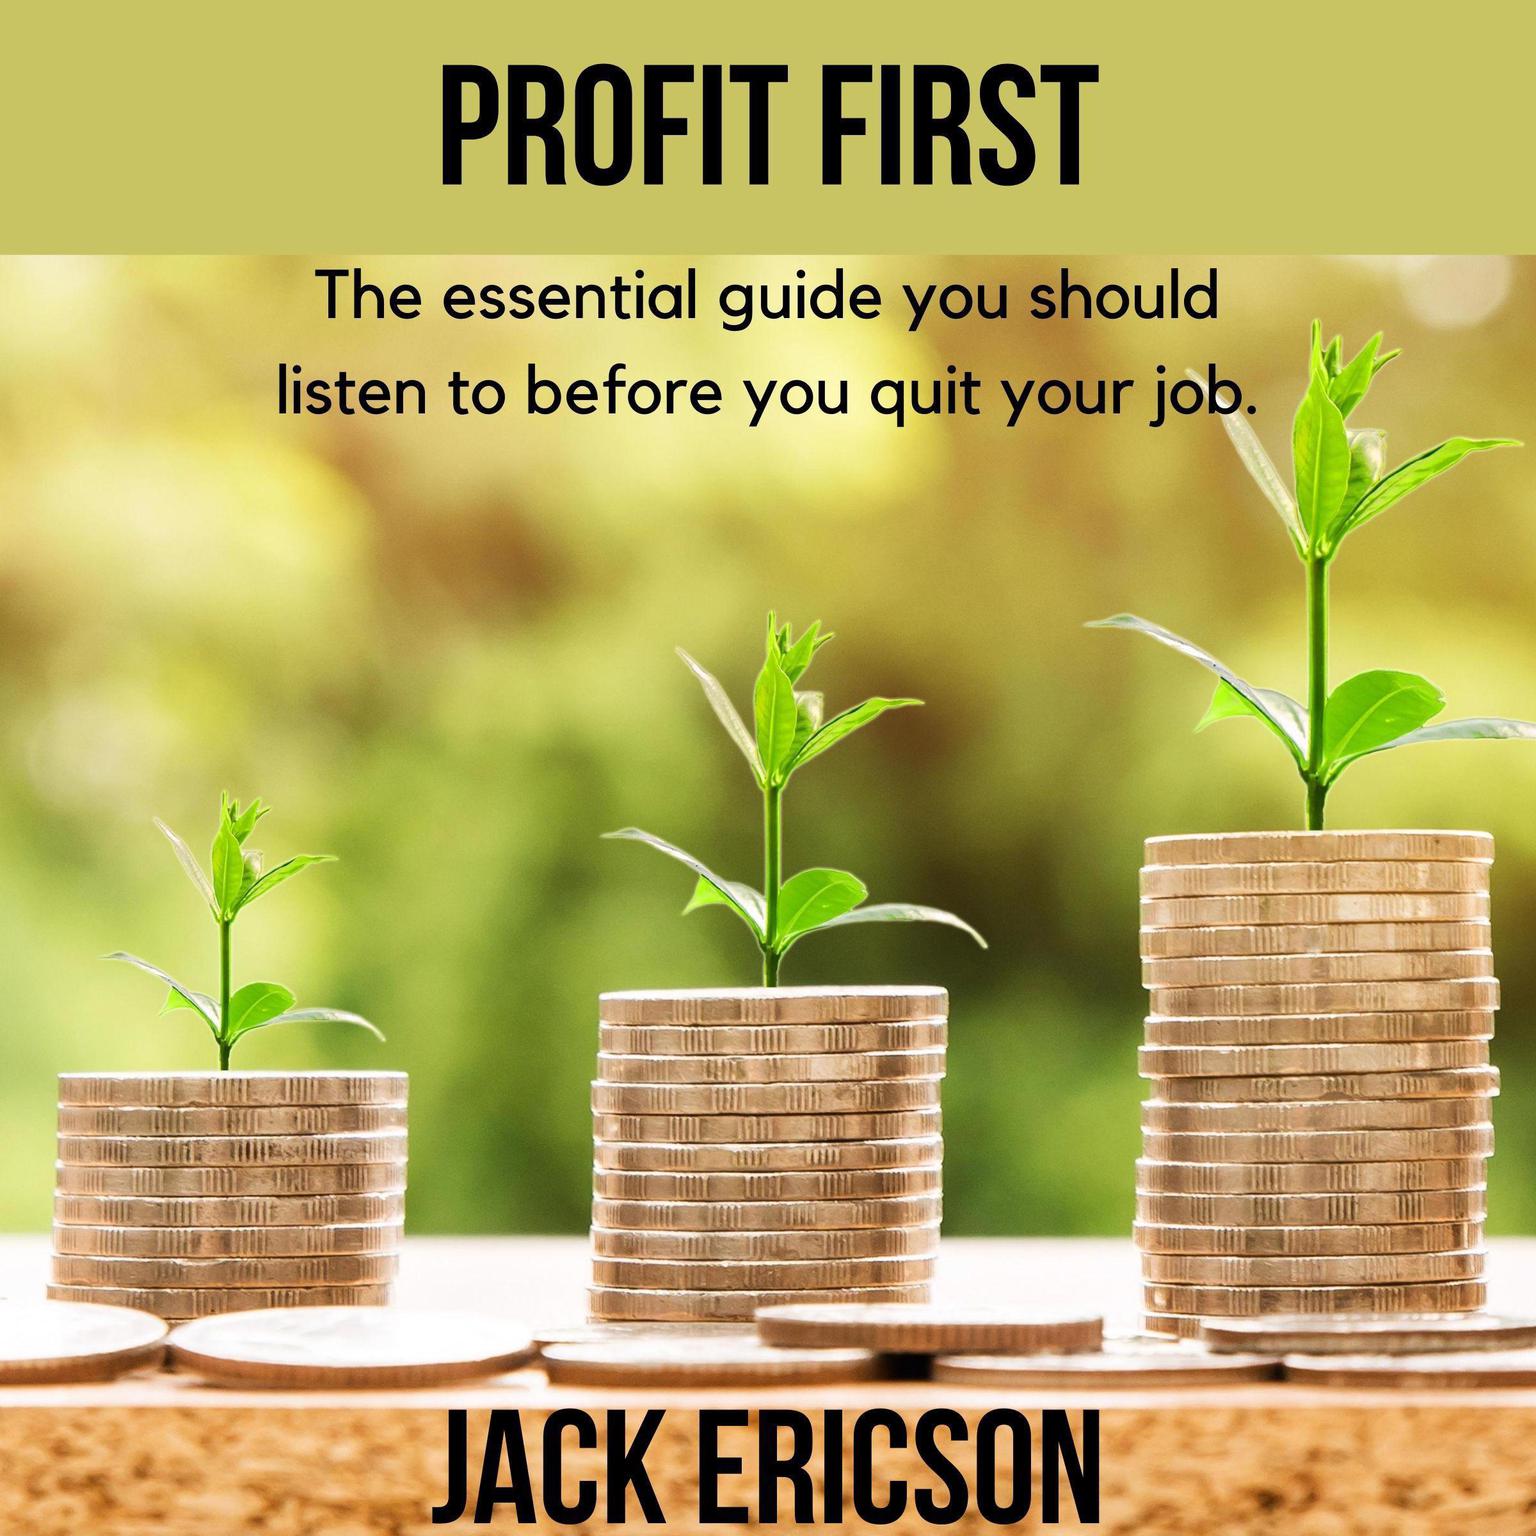 Profit First - The essential guide you should listen to before you quit your job.  Audiobook, by Jack Ericson